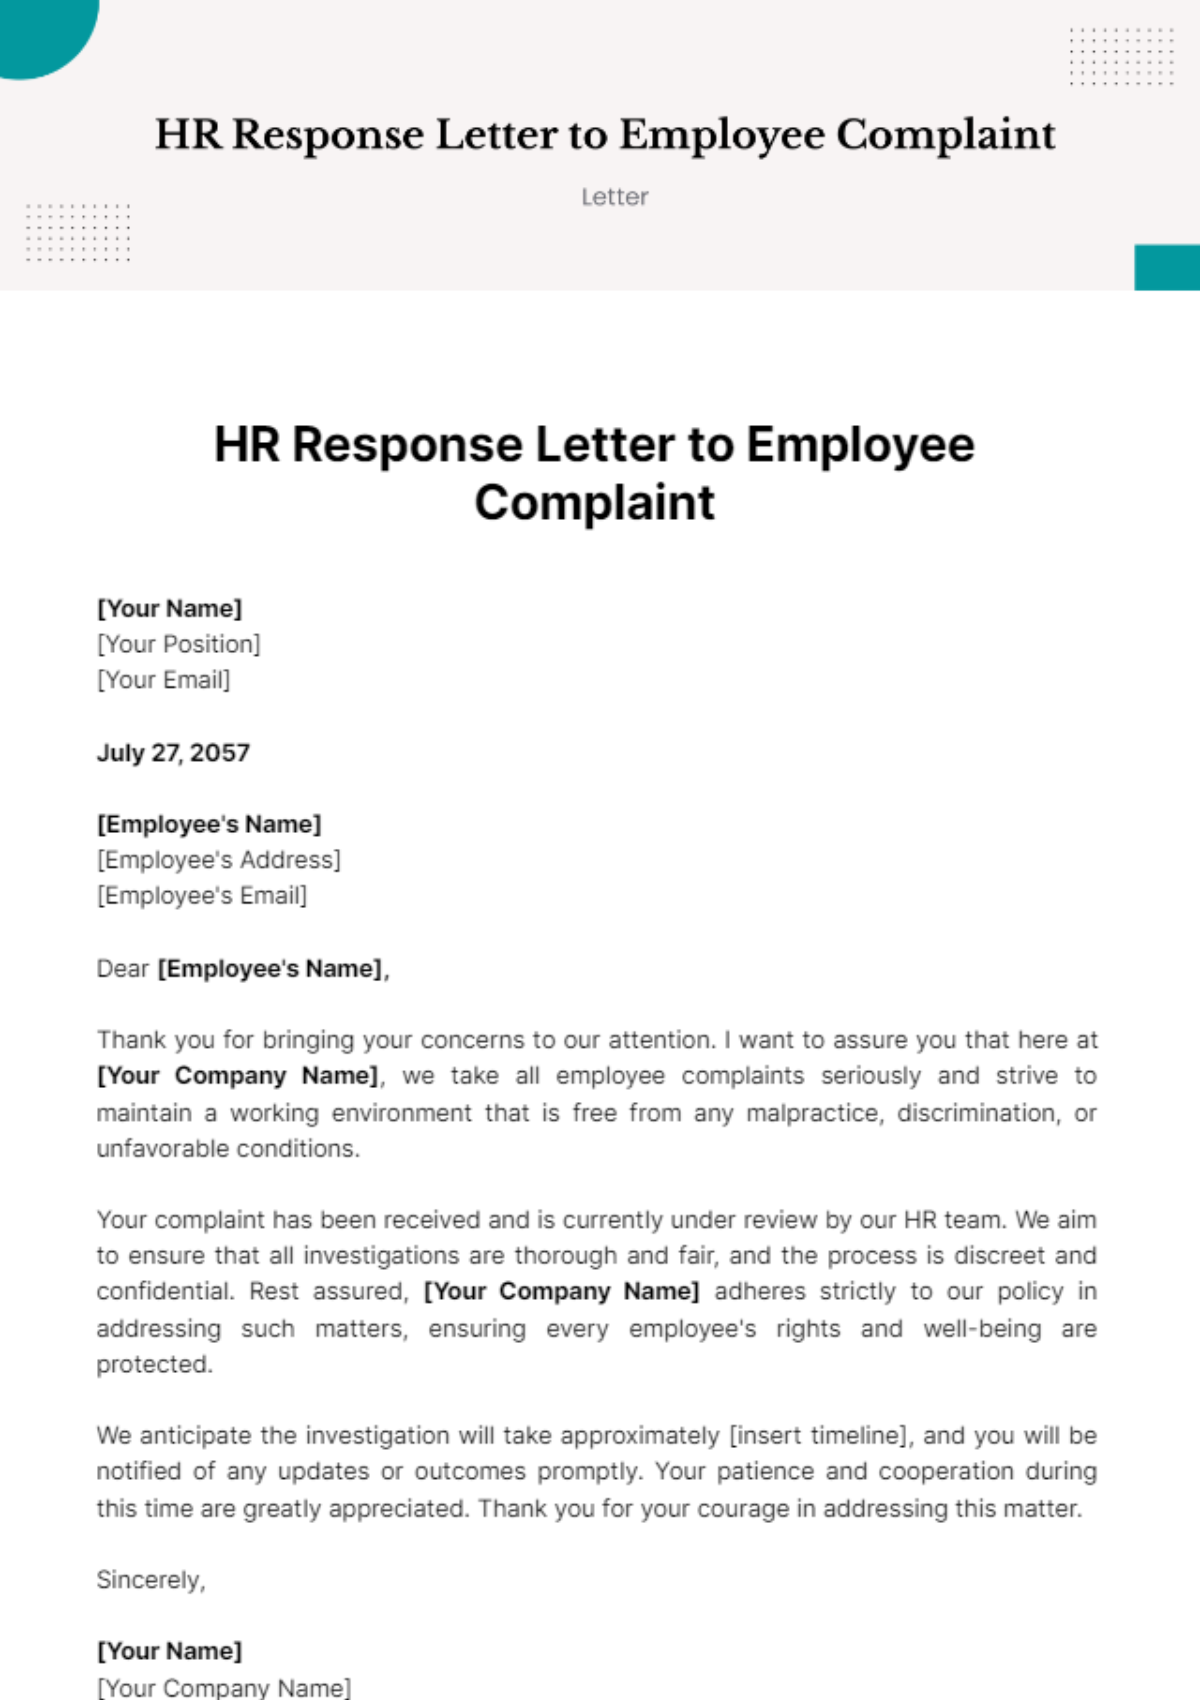 HR Response Letter to Employee Complaint Template